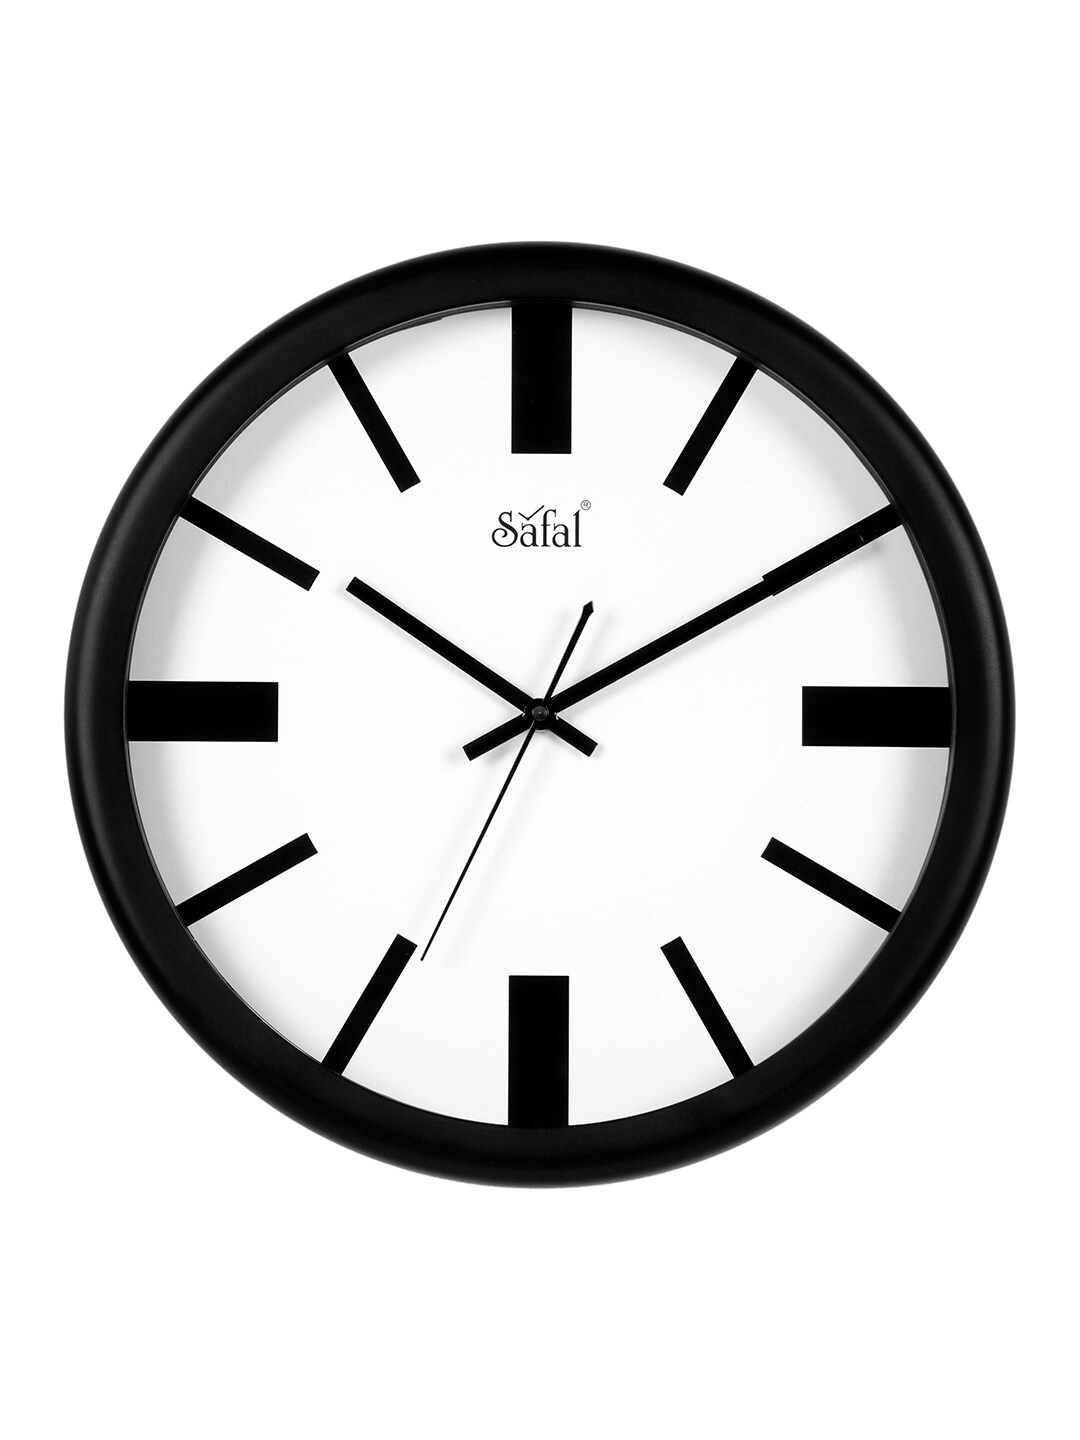 Safal Black & White Dial 34 cm Analogue Wall Clock Price in India